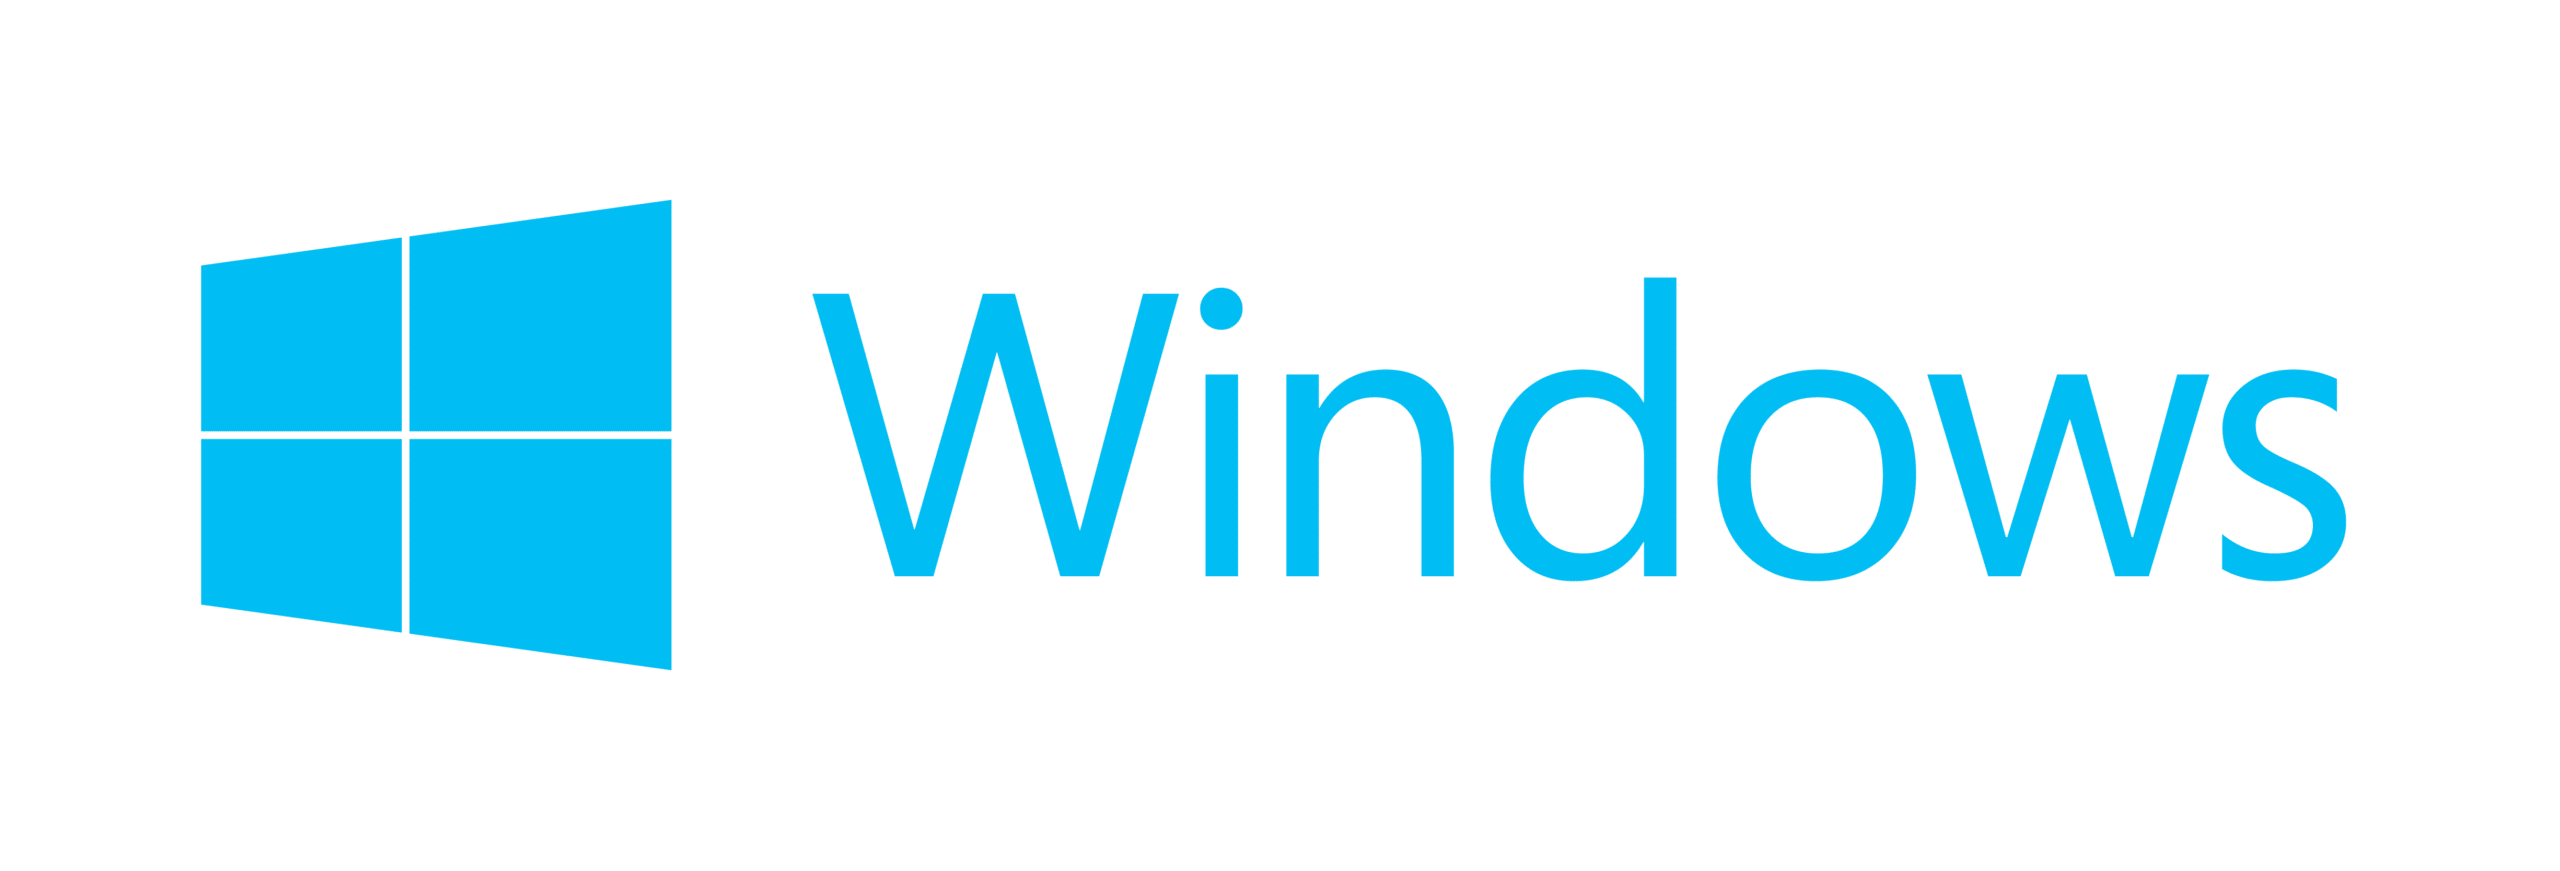 the logo for windows on a white background